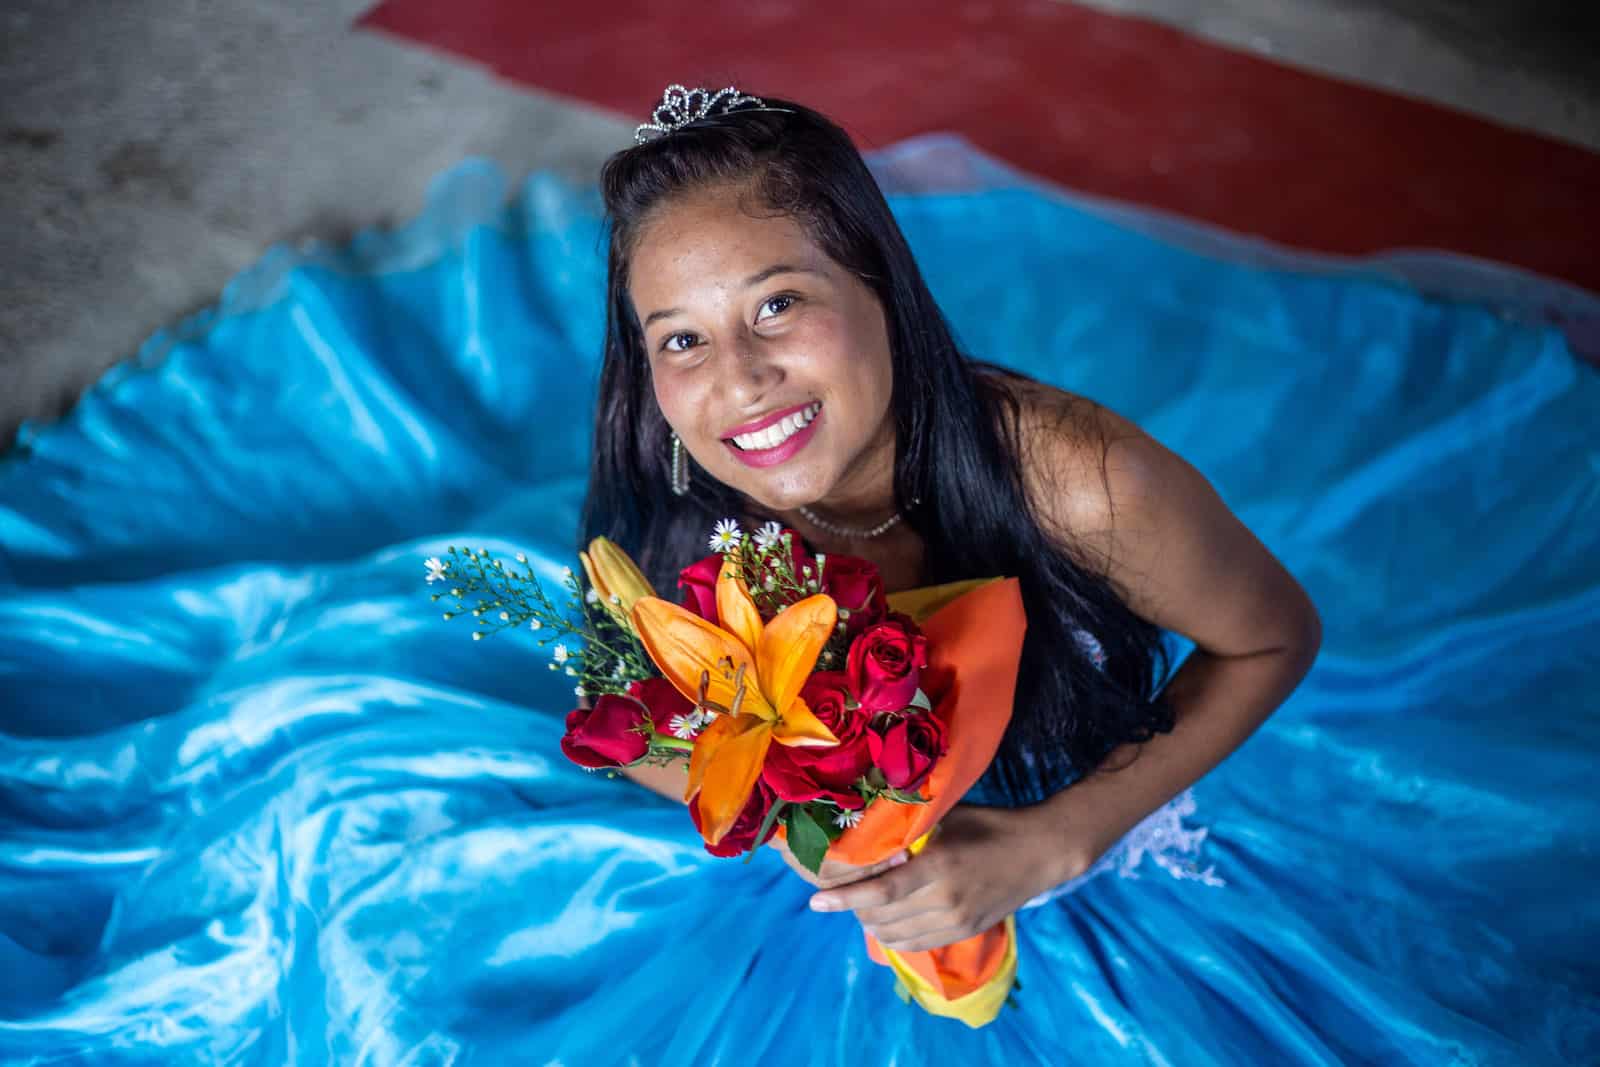 A girl in a blue ballgown sits on the ground, holding a bouquet of flowers.